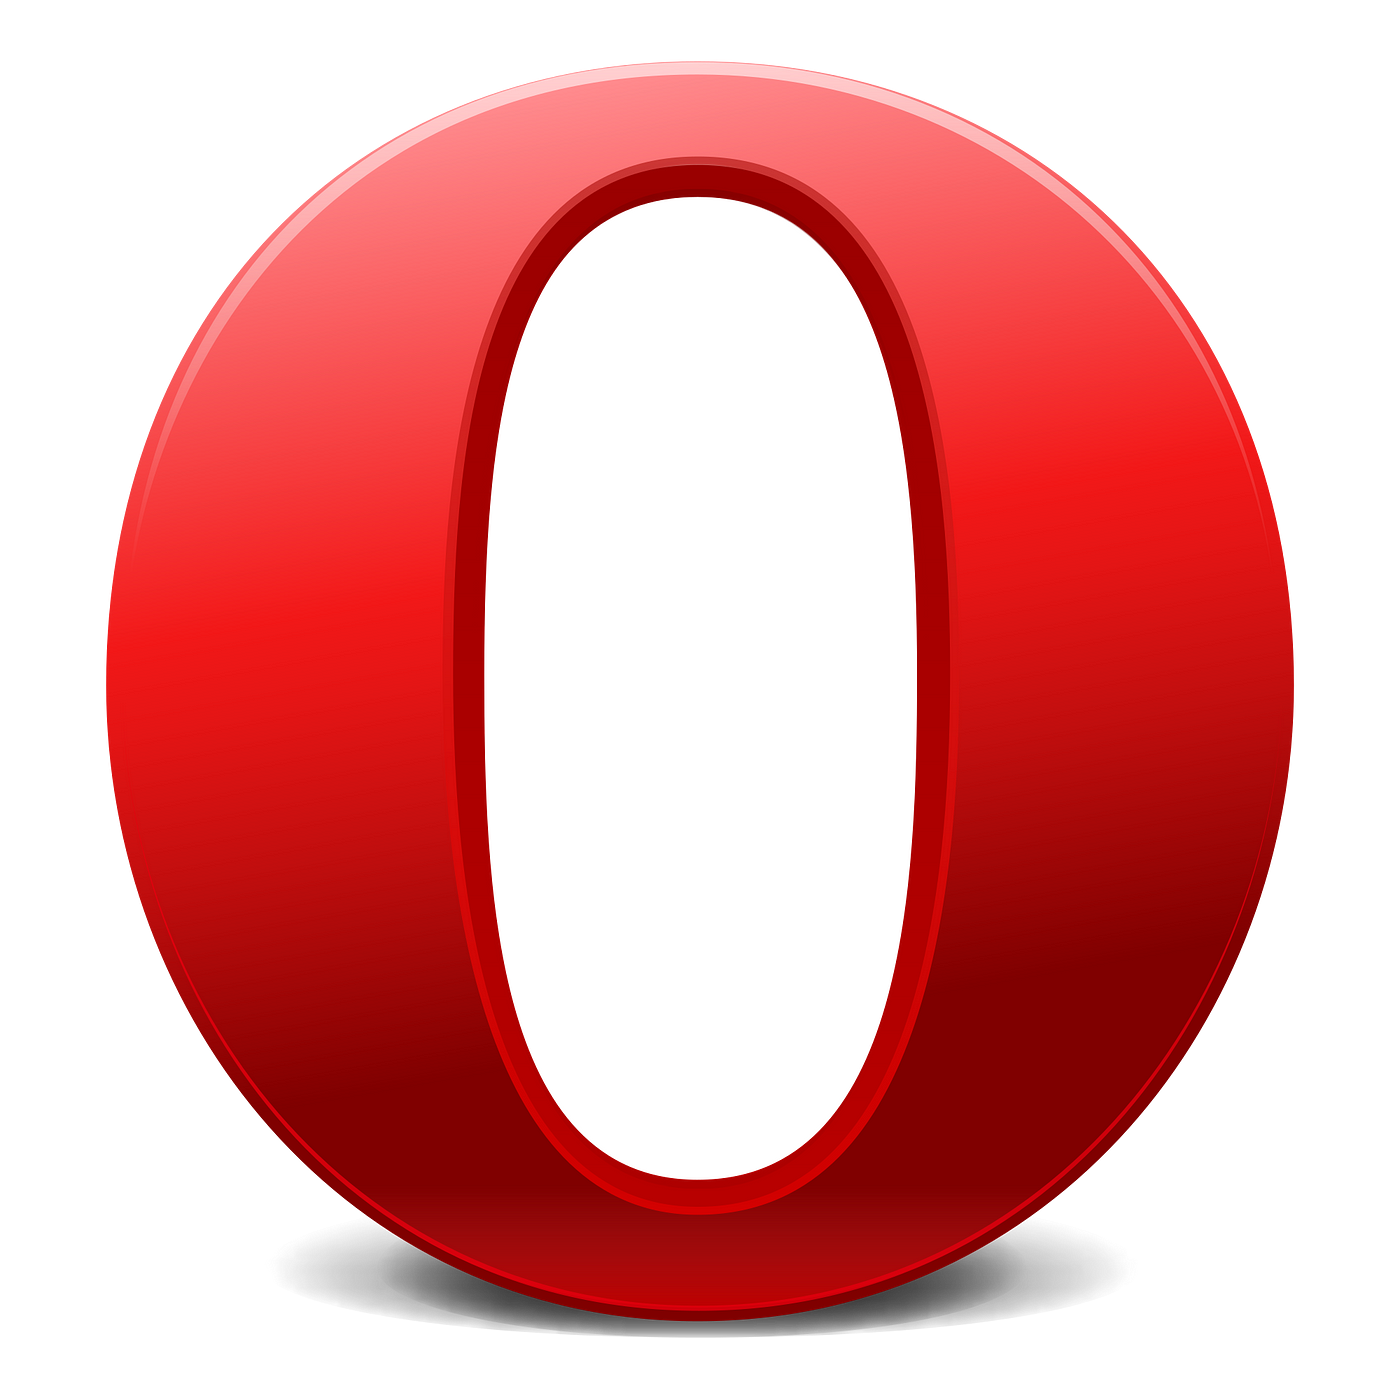 Why I Use Opera Internet Browser. Although many people take to Chrome or… |  by Robert Iannuzzi | Medium